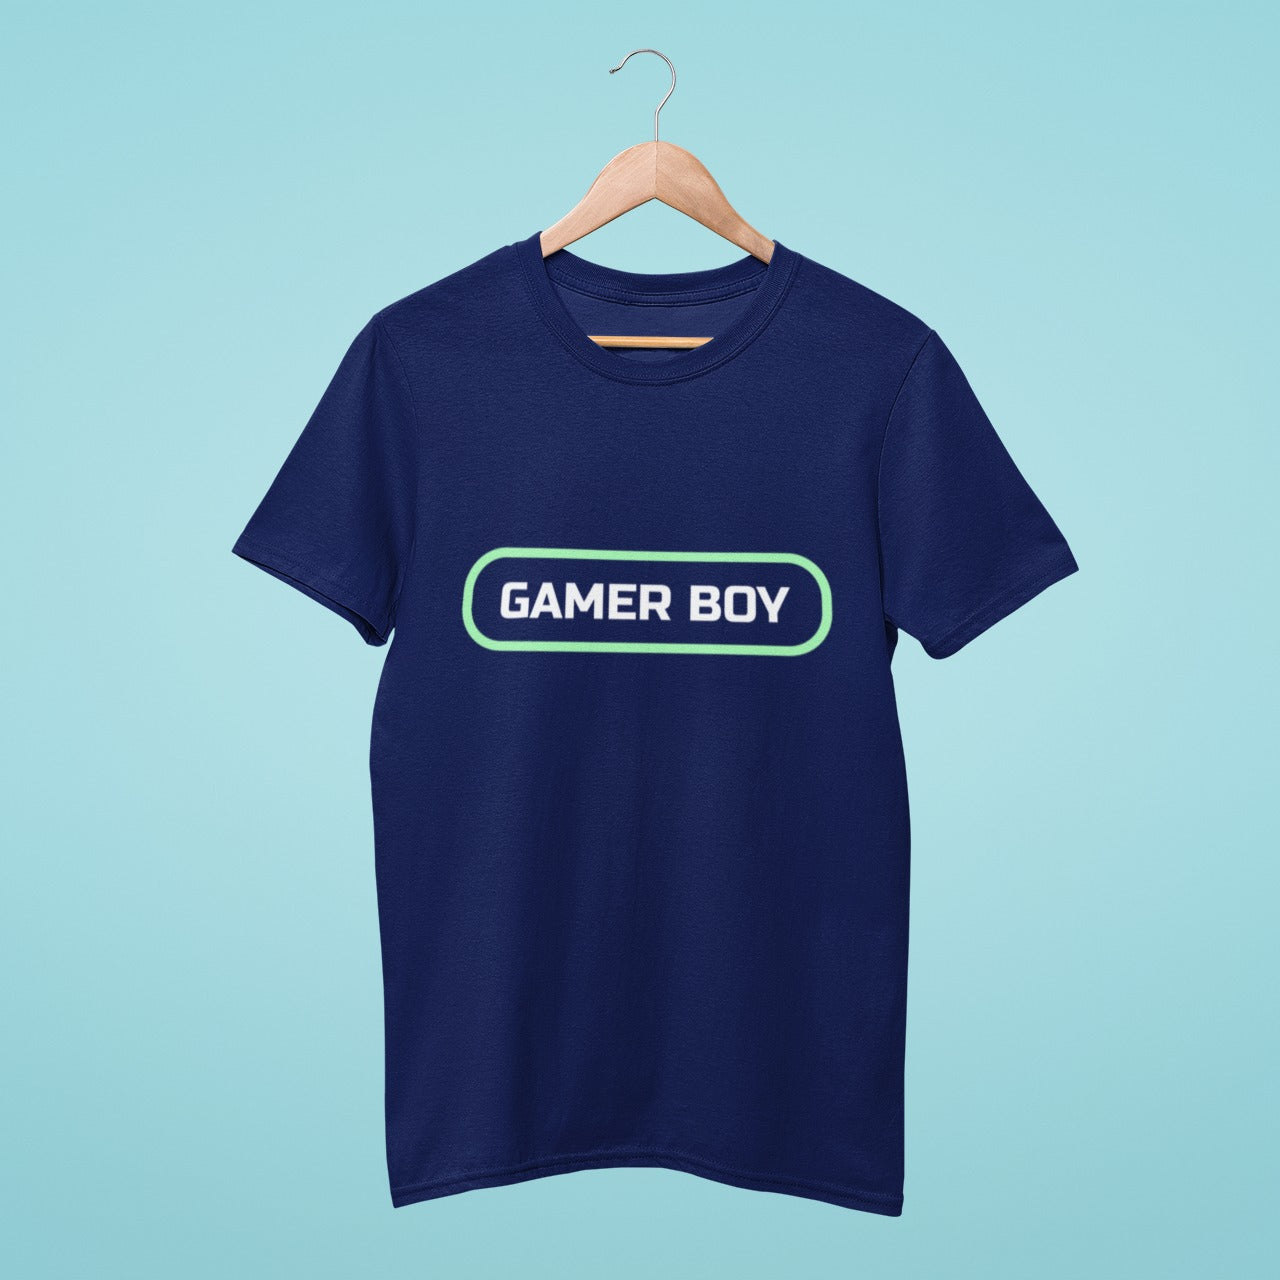 Level up your style with this navy blue t-shirt featuring 'Gamer Boy' written like a game button. Perfect for showing off your passion for gaming in a fashionable way. Get yours now!